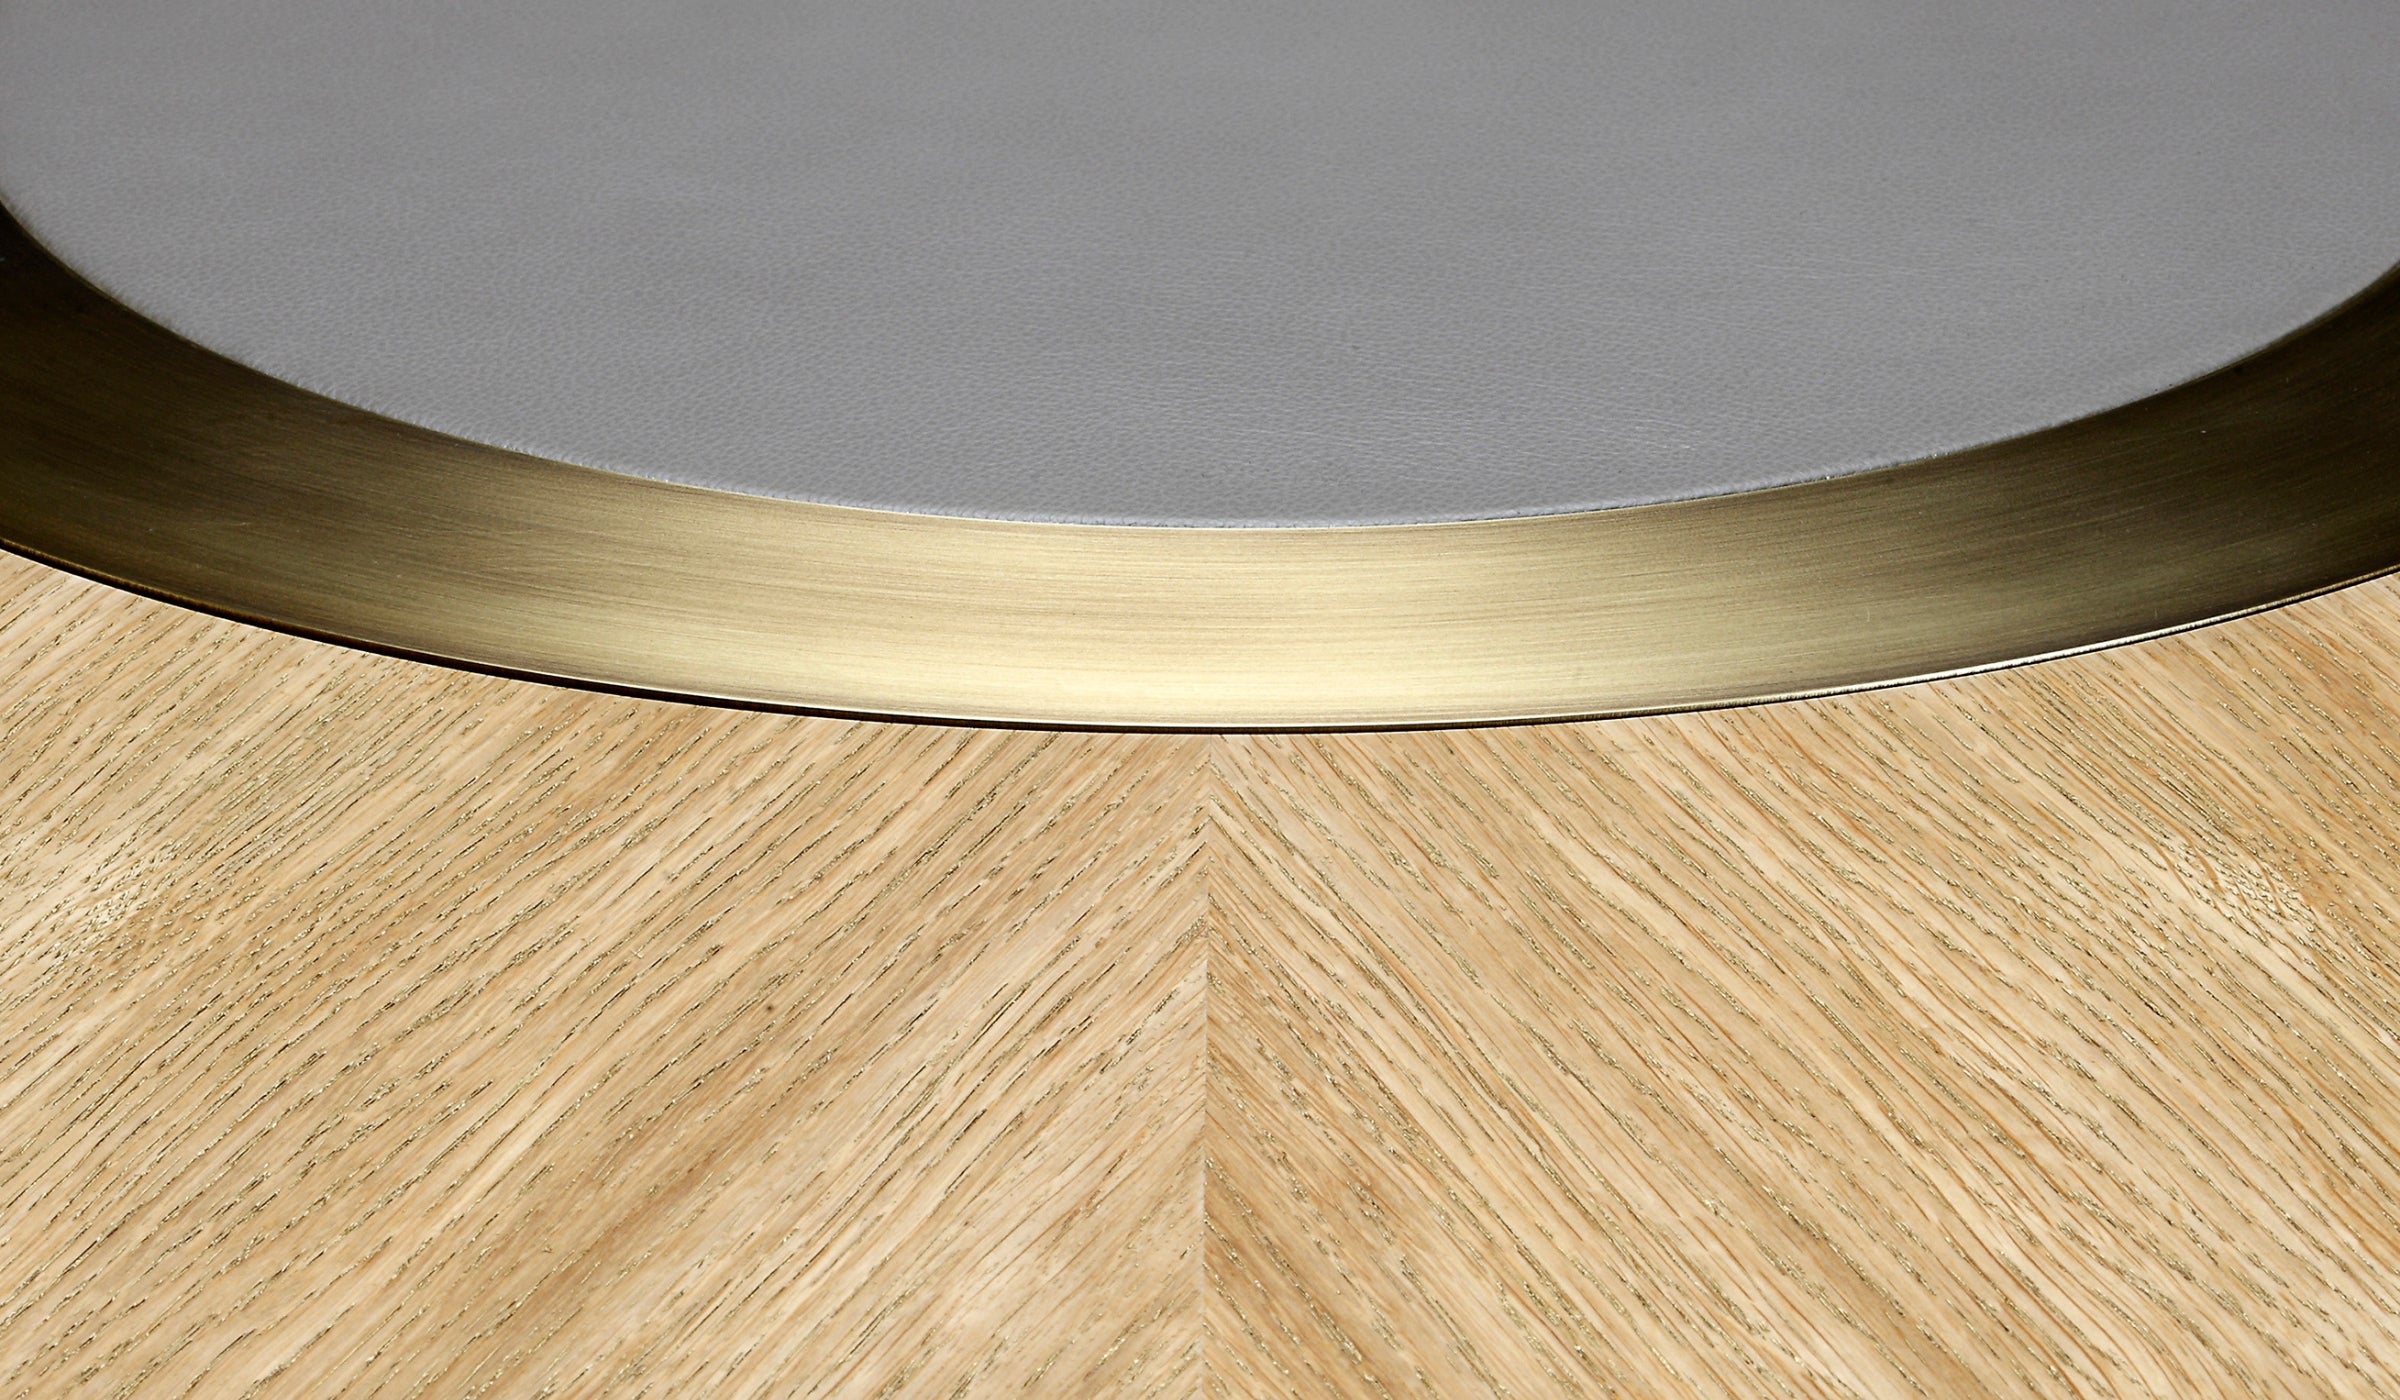 Lune - Dining table in limed oak, bronze and leather details